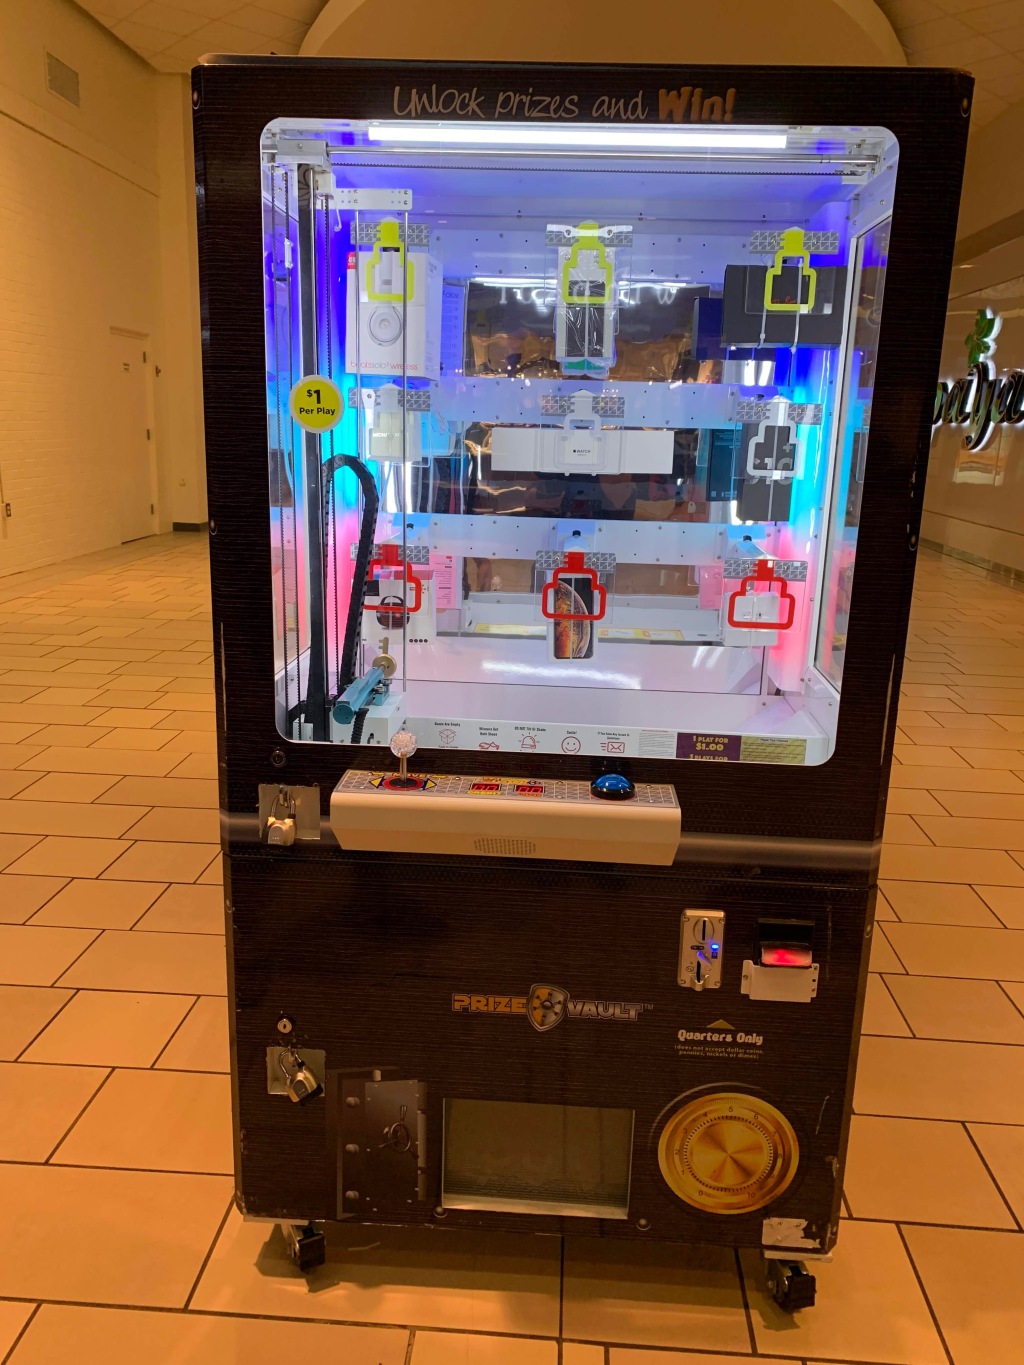 Make Your Business Stand Out with Coin Operated Arcade Games